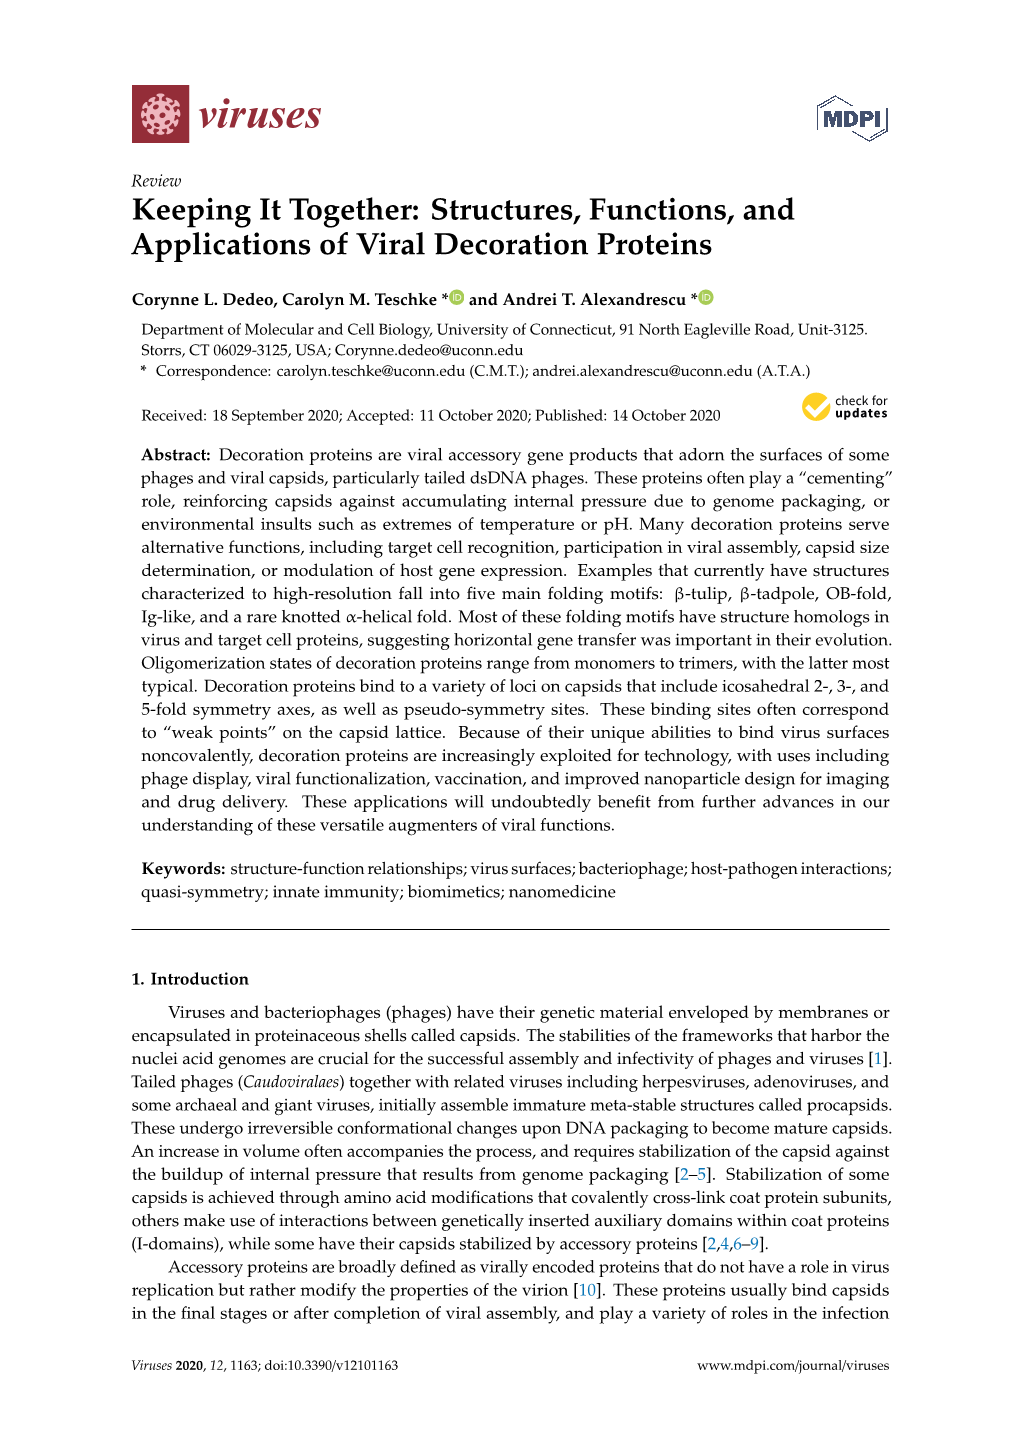 Structures, Functions, and Applications of Viral Decoration Proteins